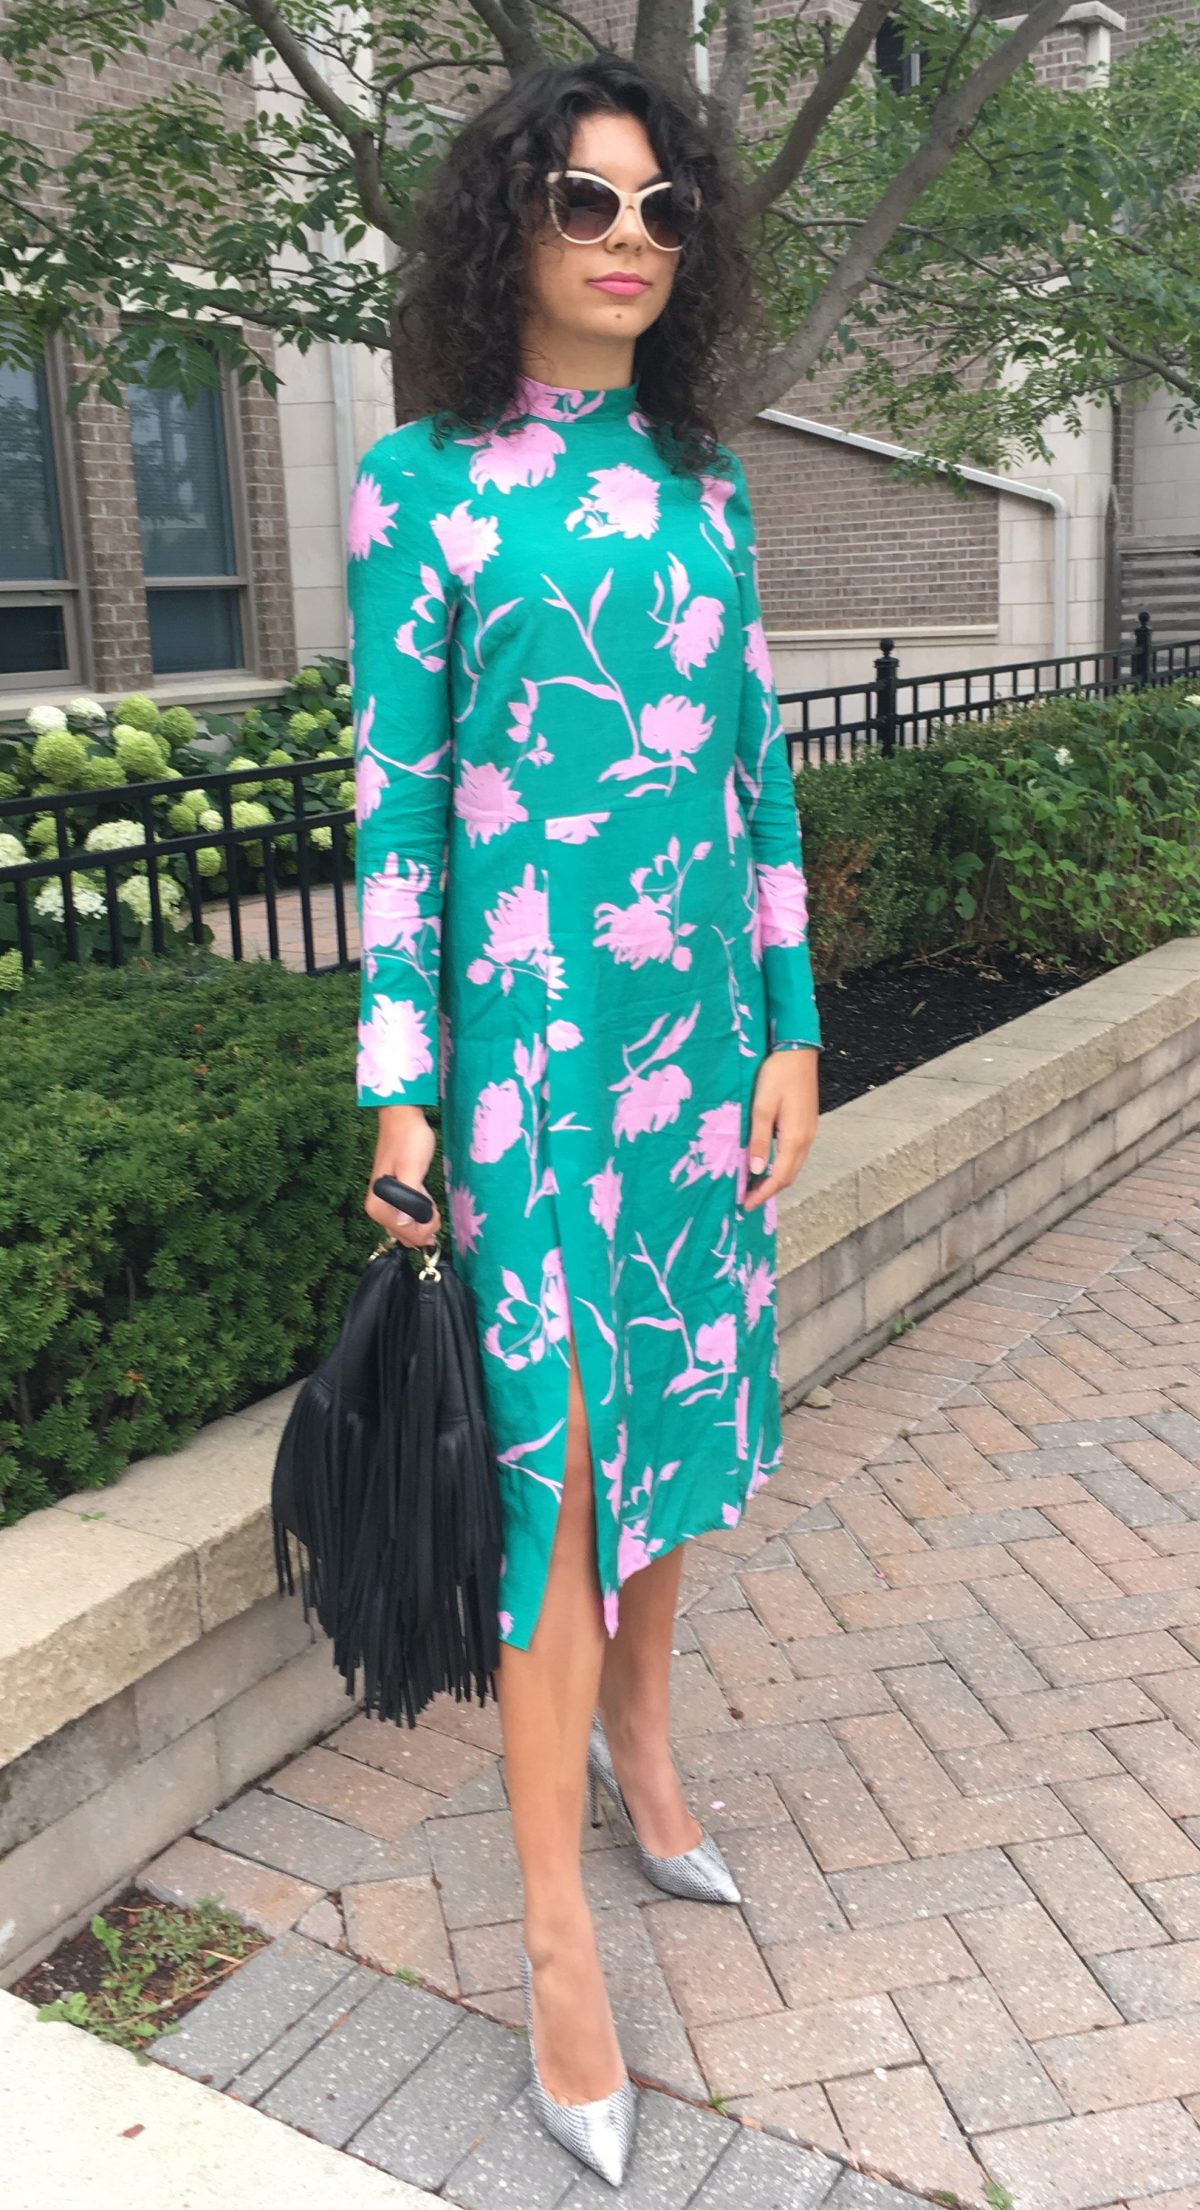 tina in a green floral dress in Mississauga